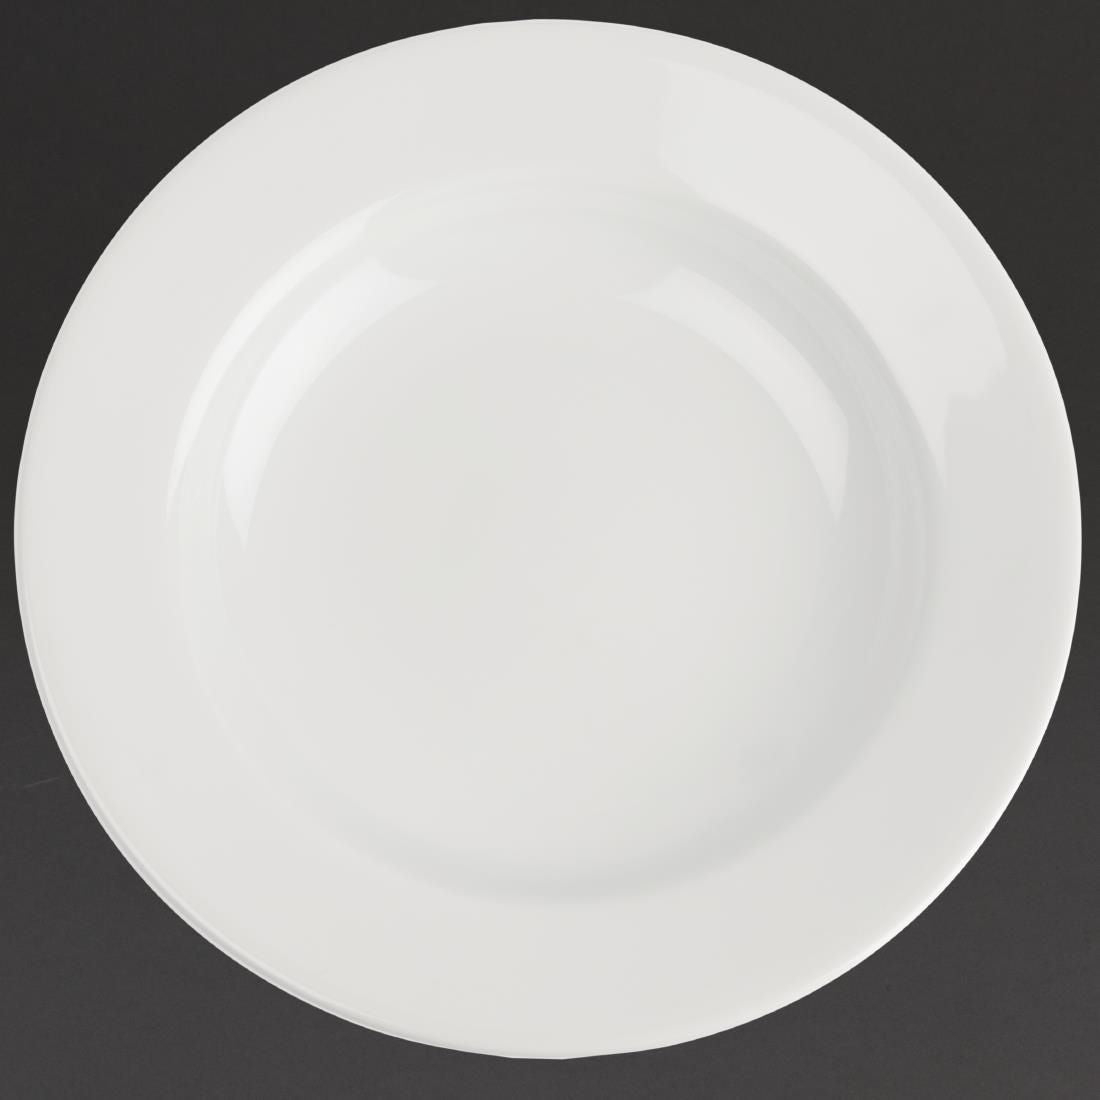 Royal Porcelain Classic White Wide Rim Plates 160mm (Pack of 12)